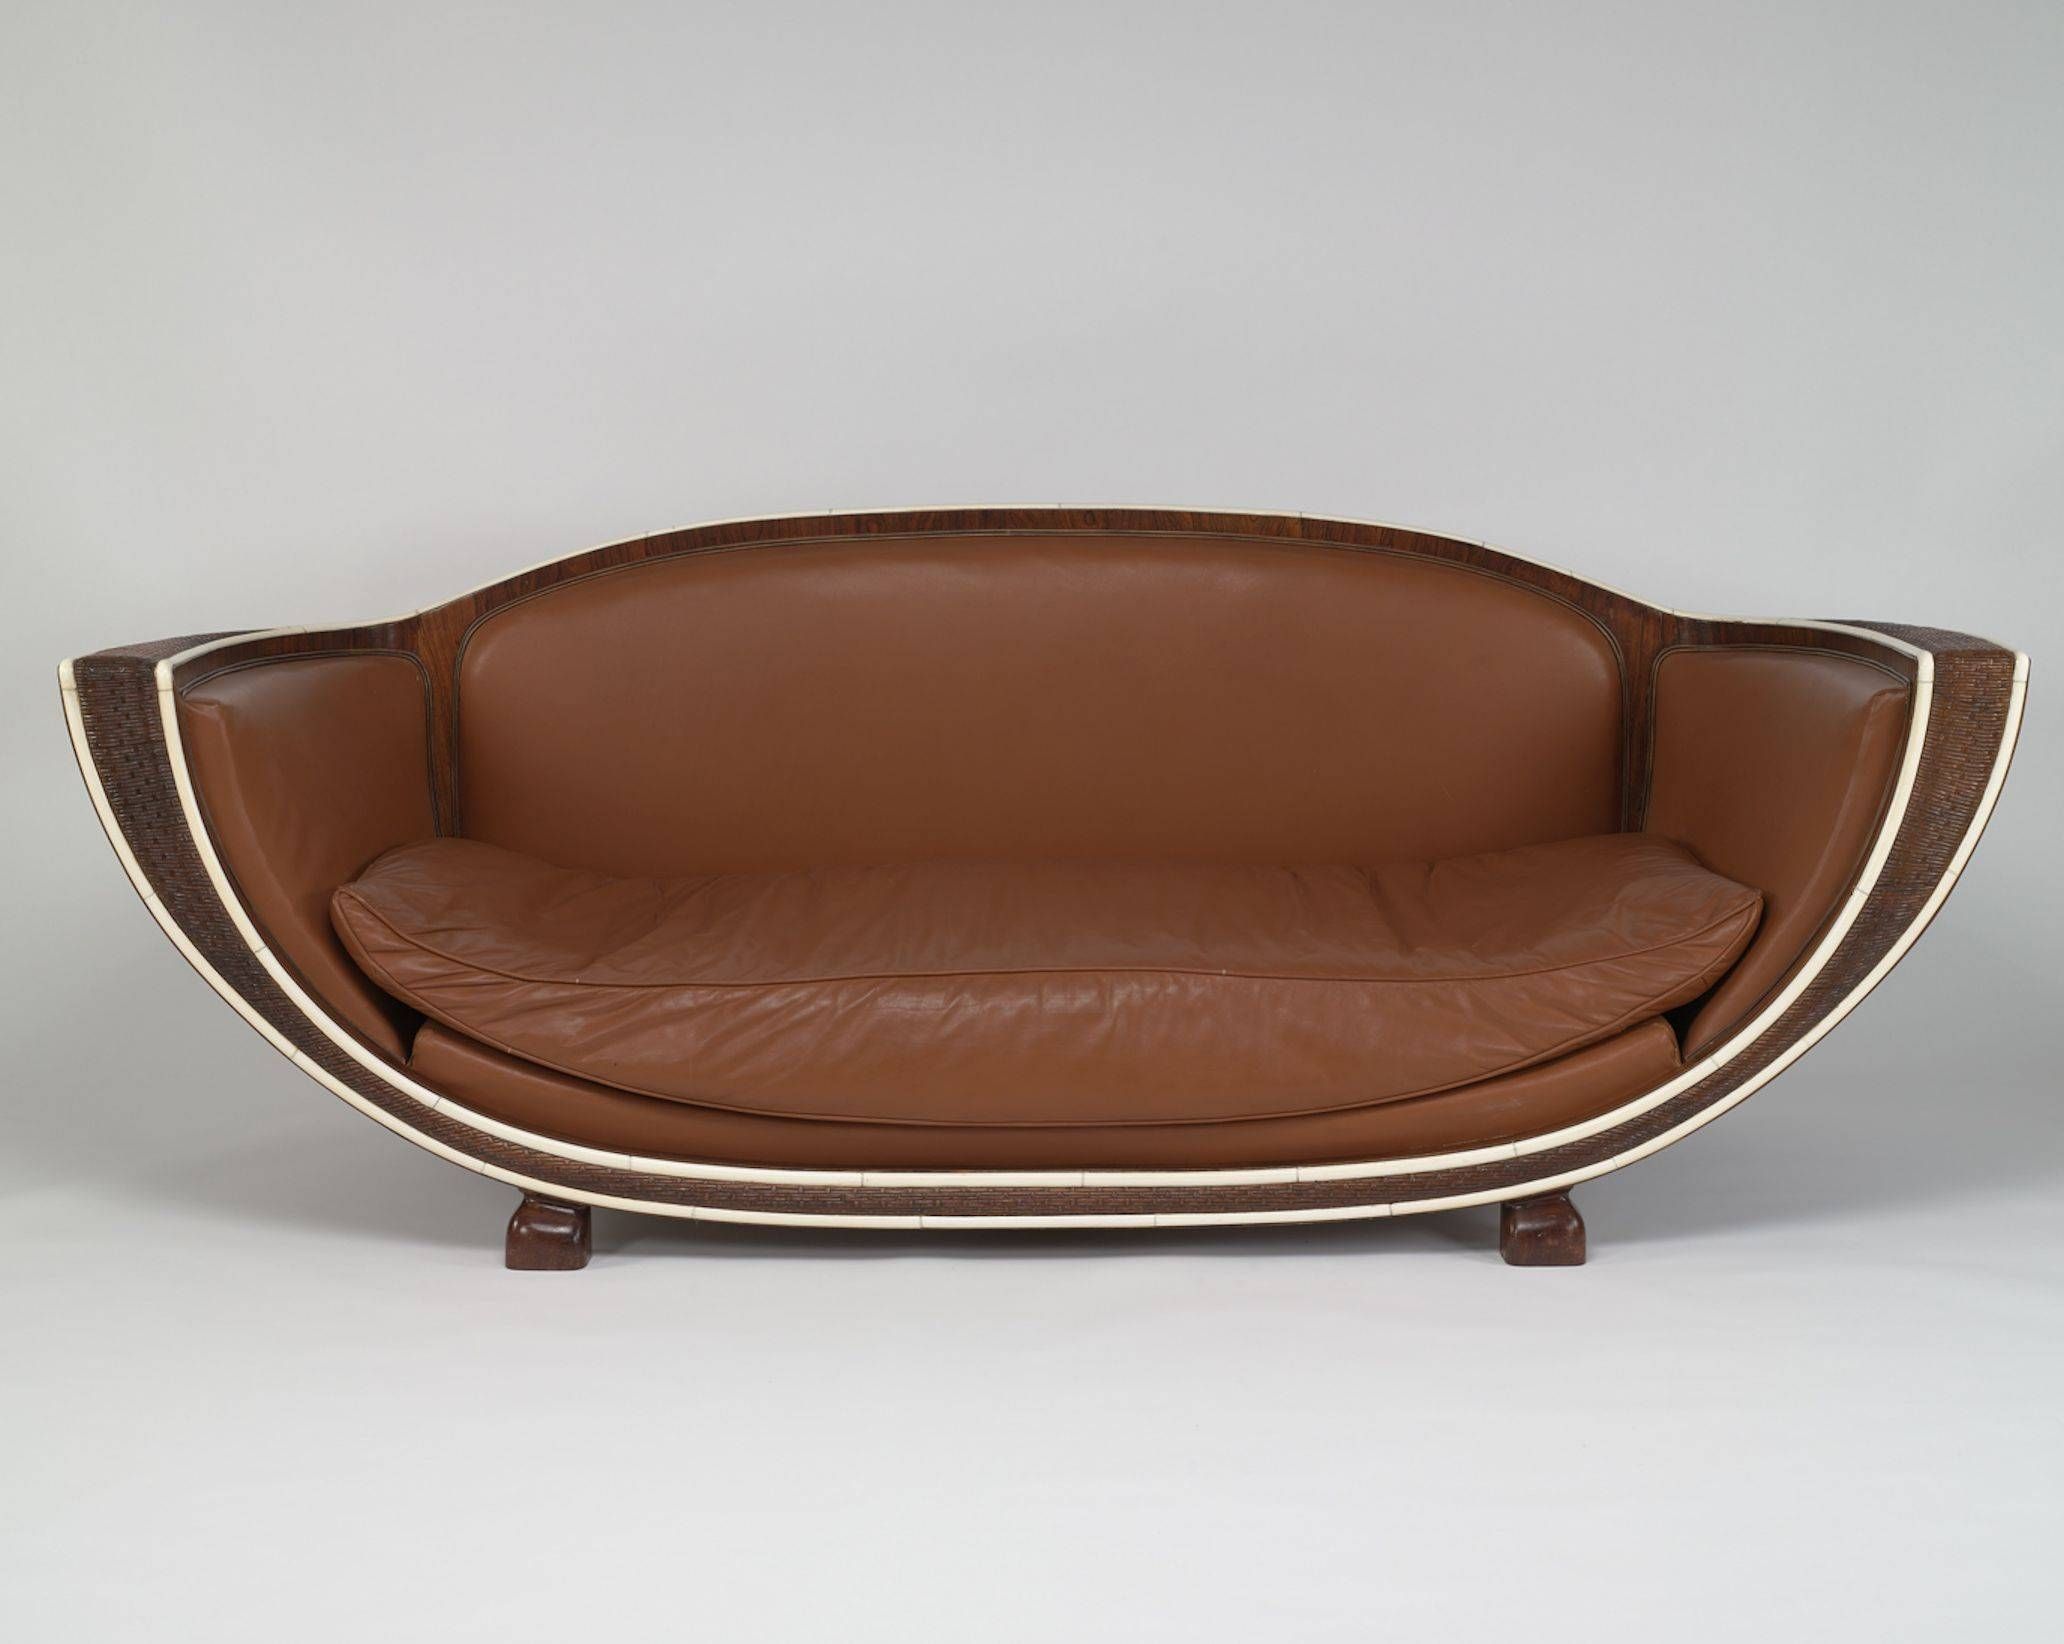 Sofas Center : Exceptional Streamlined Art Decofa With Exotic Wood Throughout 1930s Sofas (Photo 26 of 30)